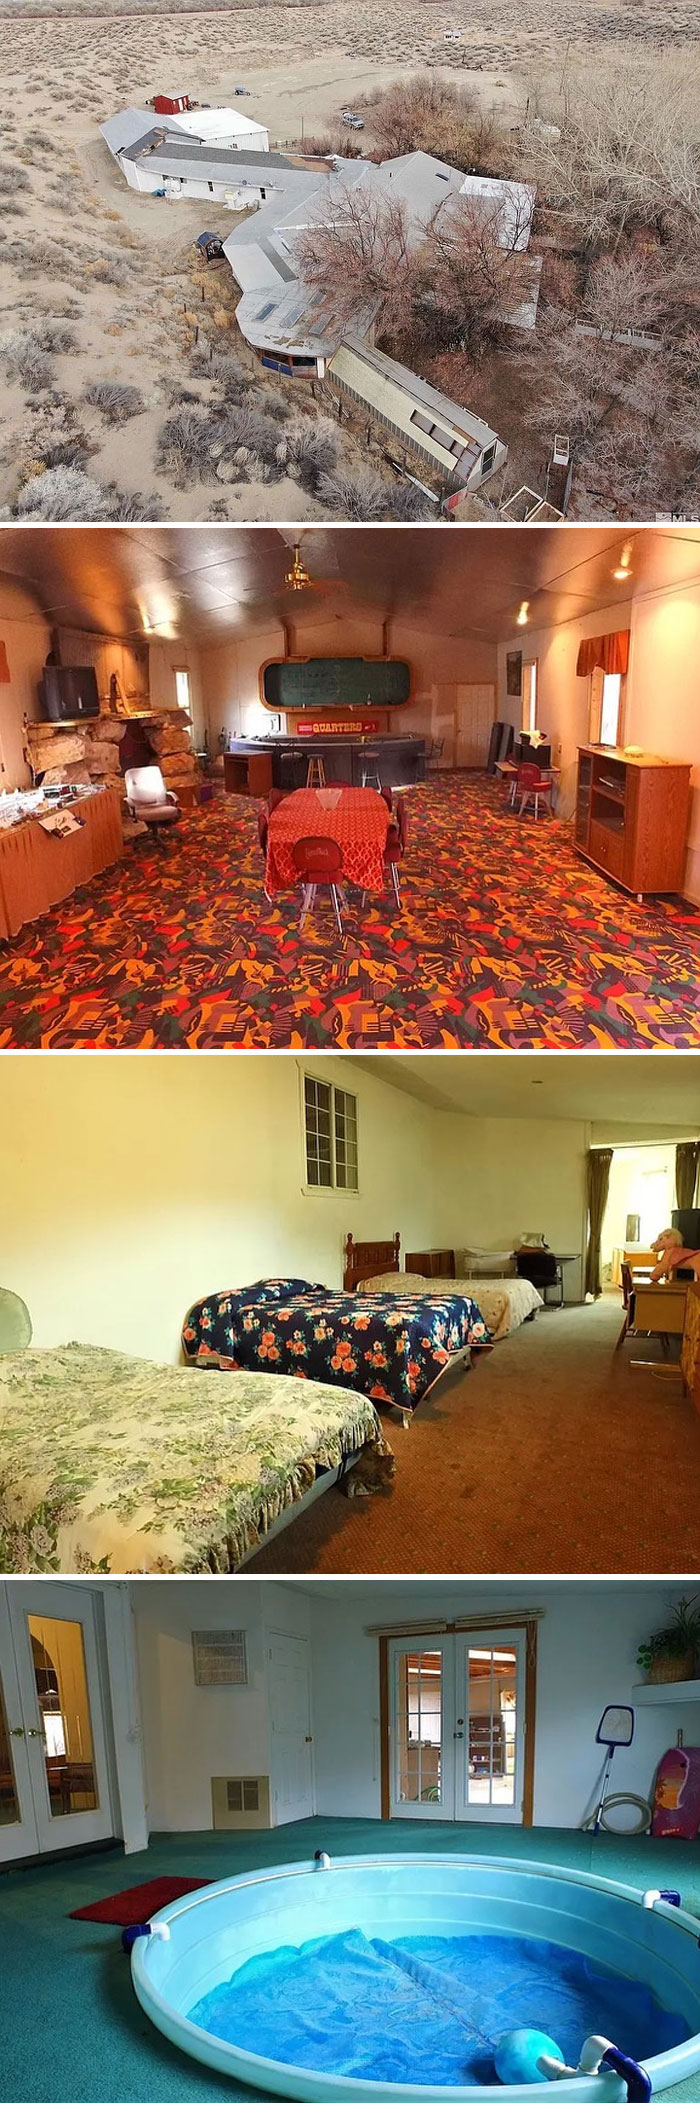 Weirdo Cult House In Nv Is Also Set In 1981 With Some Serious Carpet And Decor